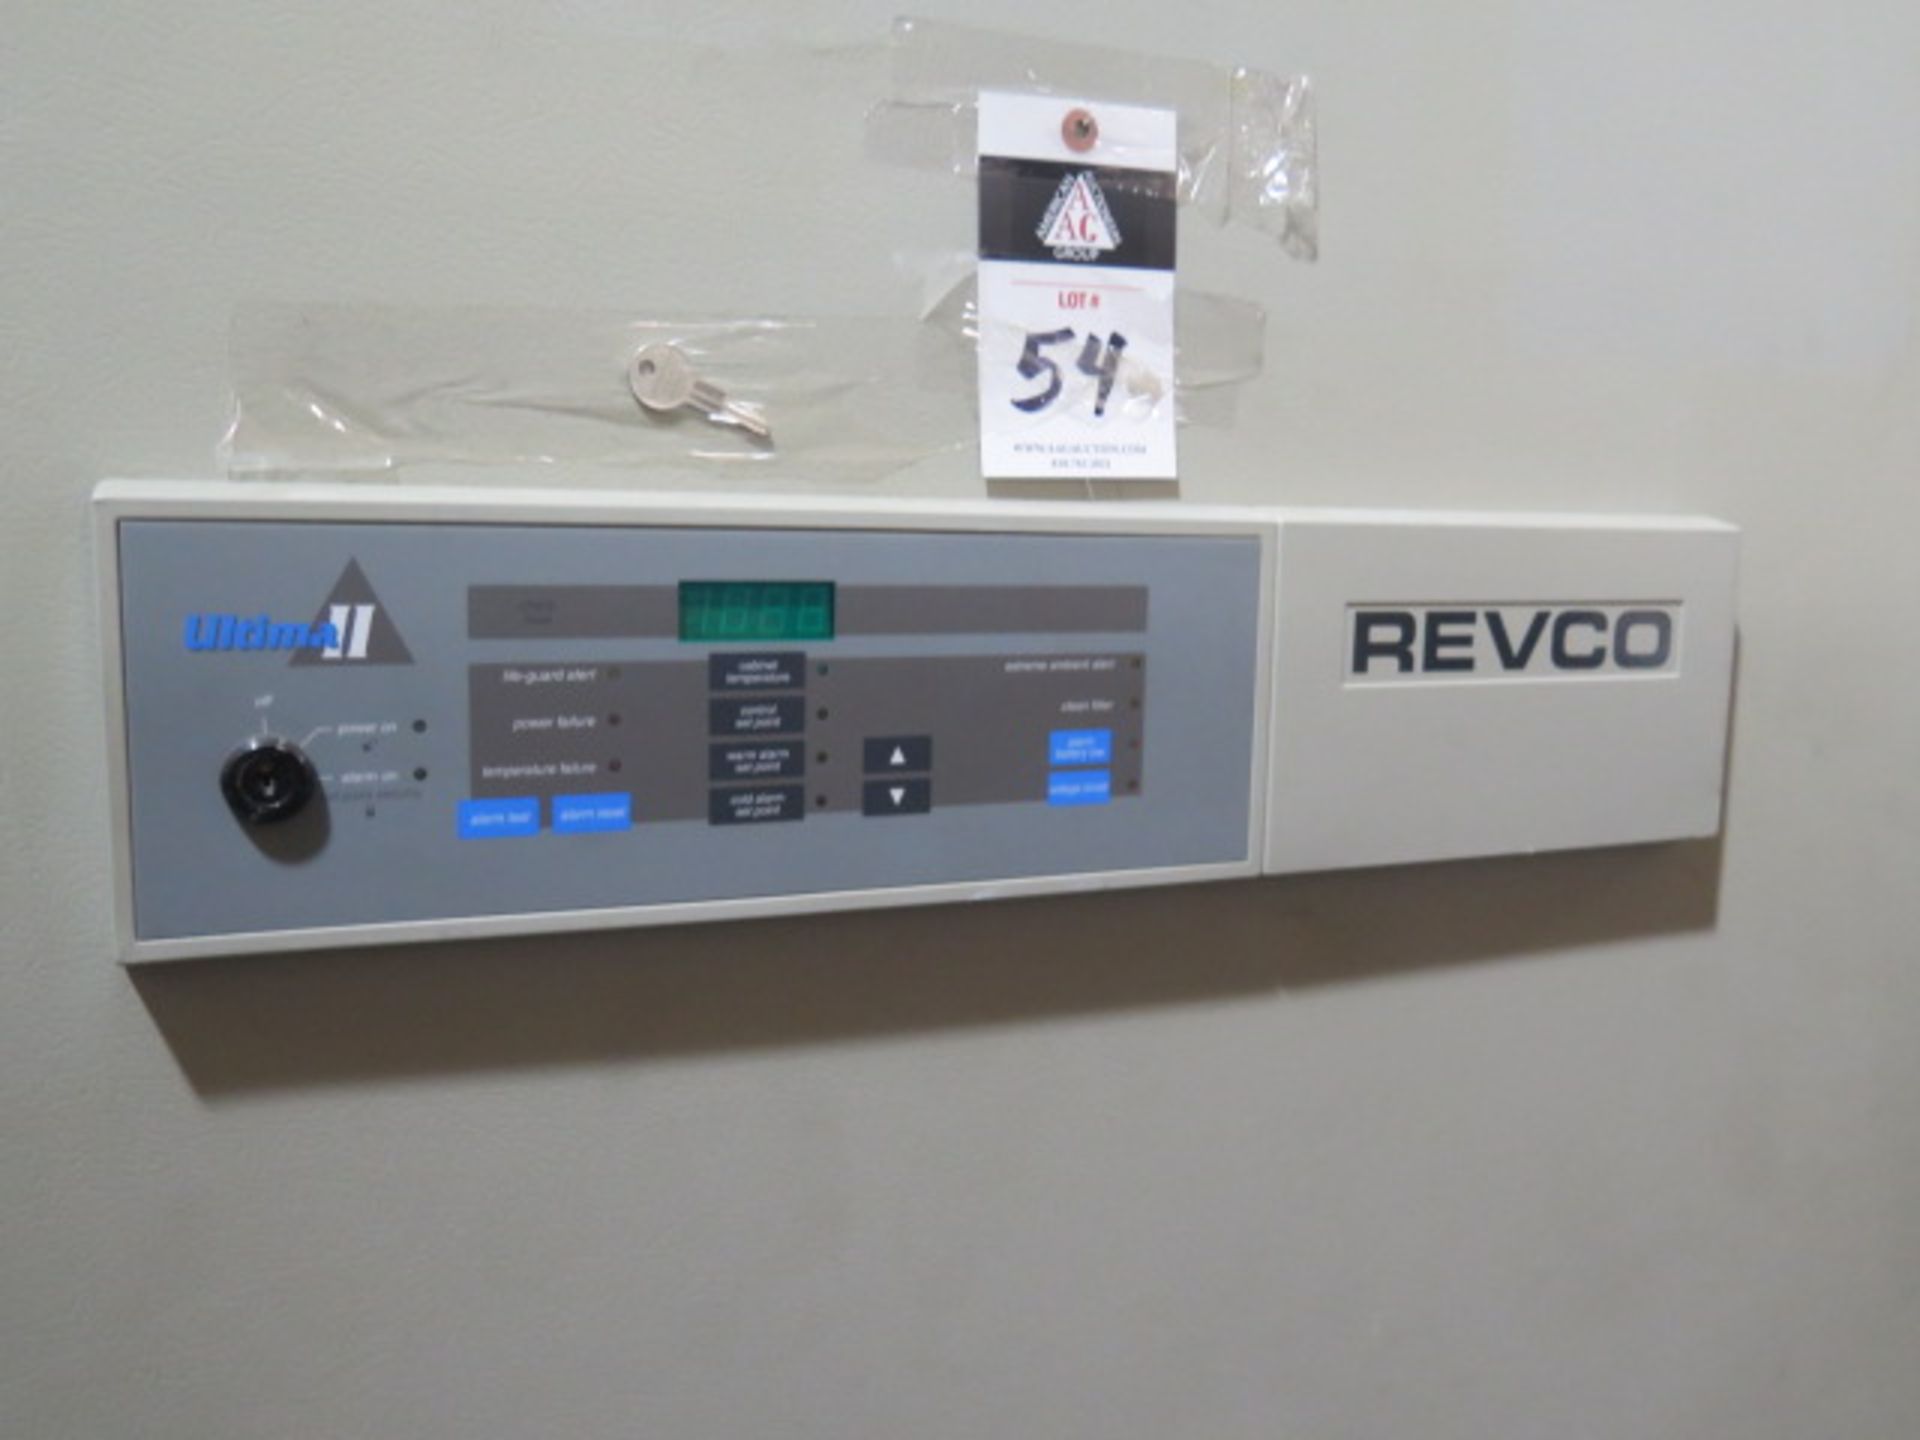 Revco ULT2586-9-A34 -80 Degree Lab Freezer (SOLD AS-IS - NO WARRANTY) - Image 5 of 8